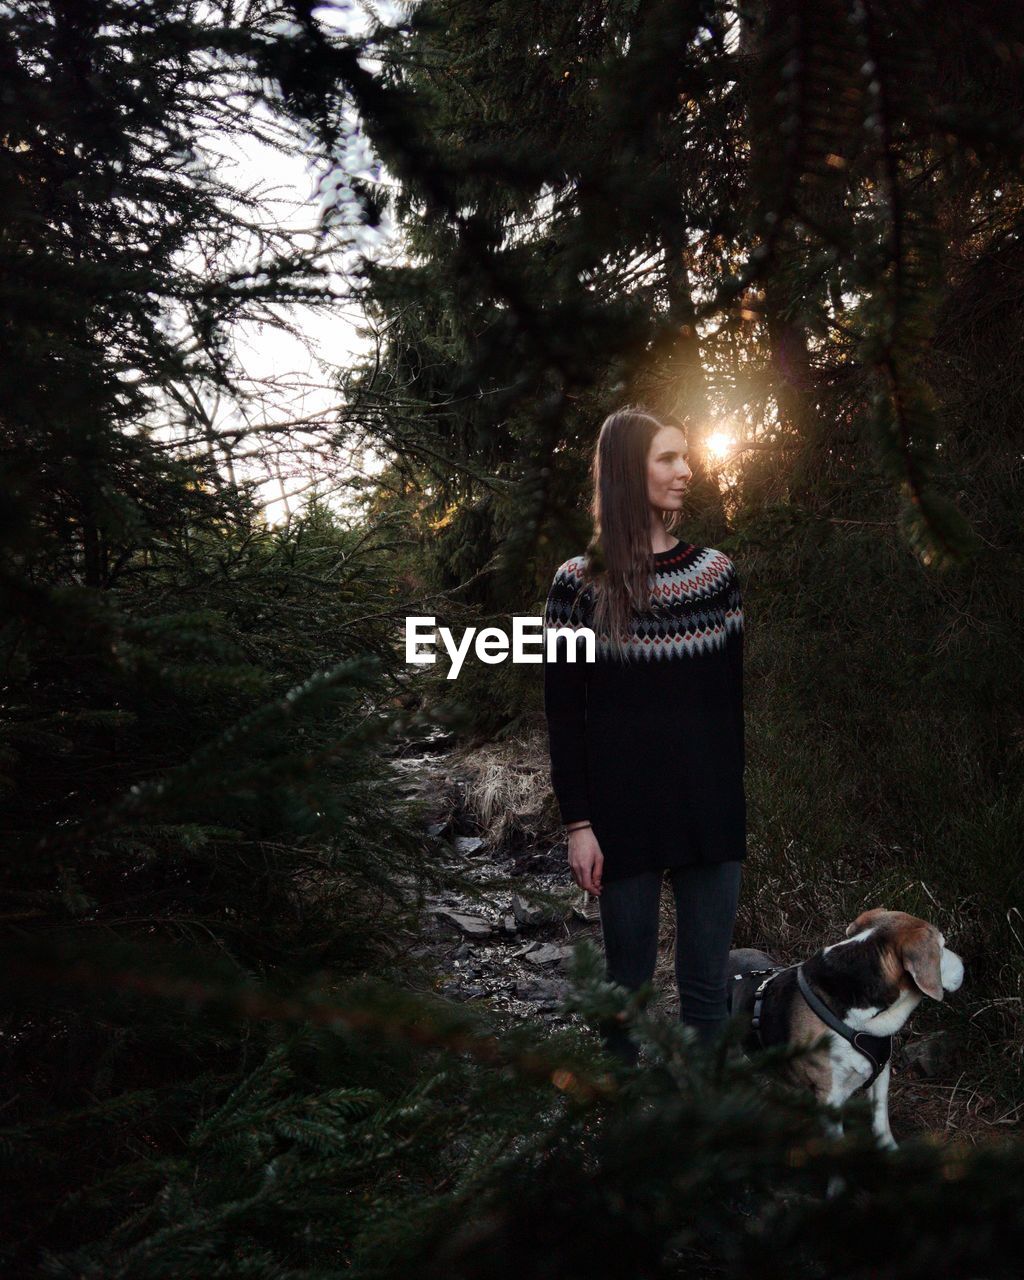 Woman with dog standing amidst trees in forest